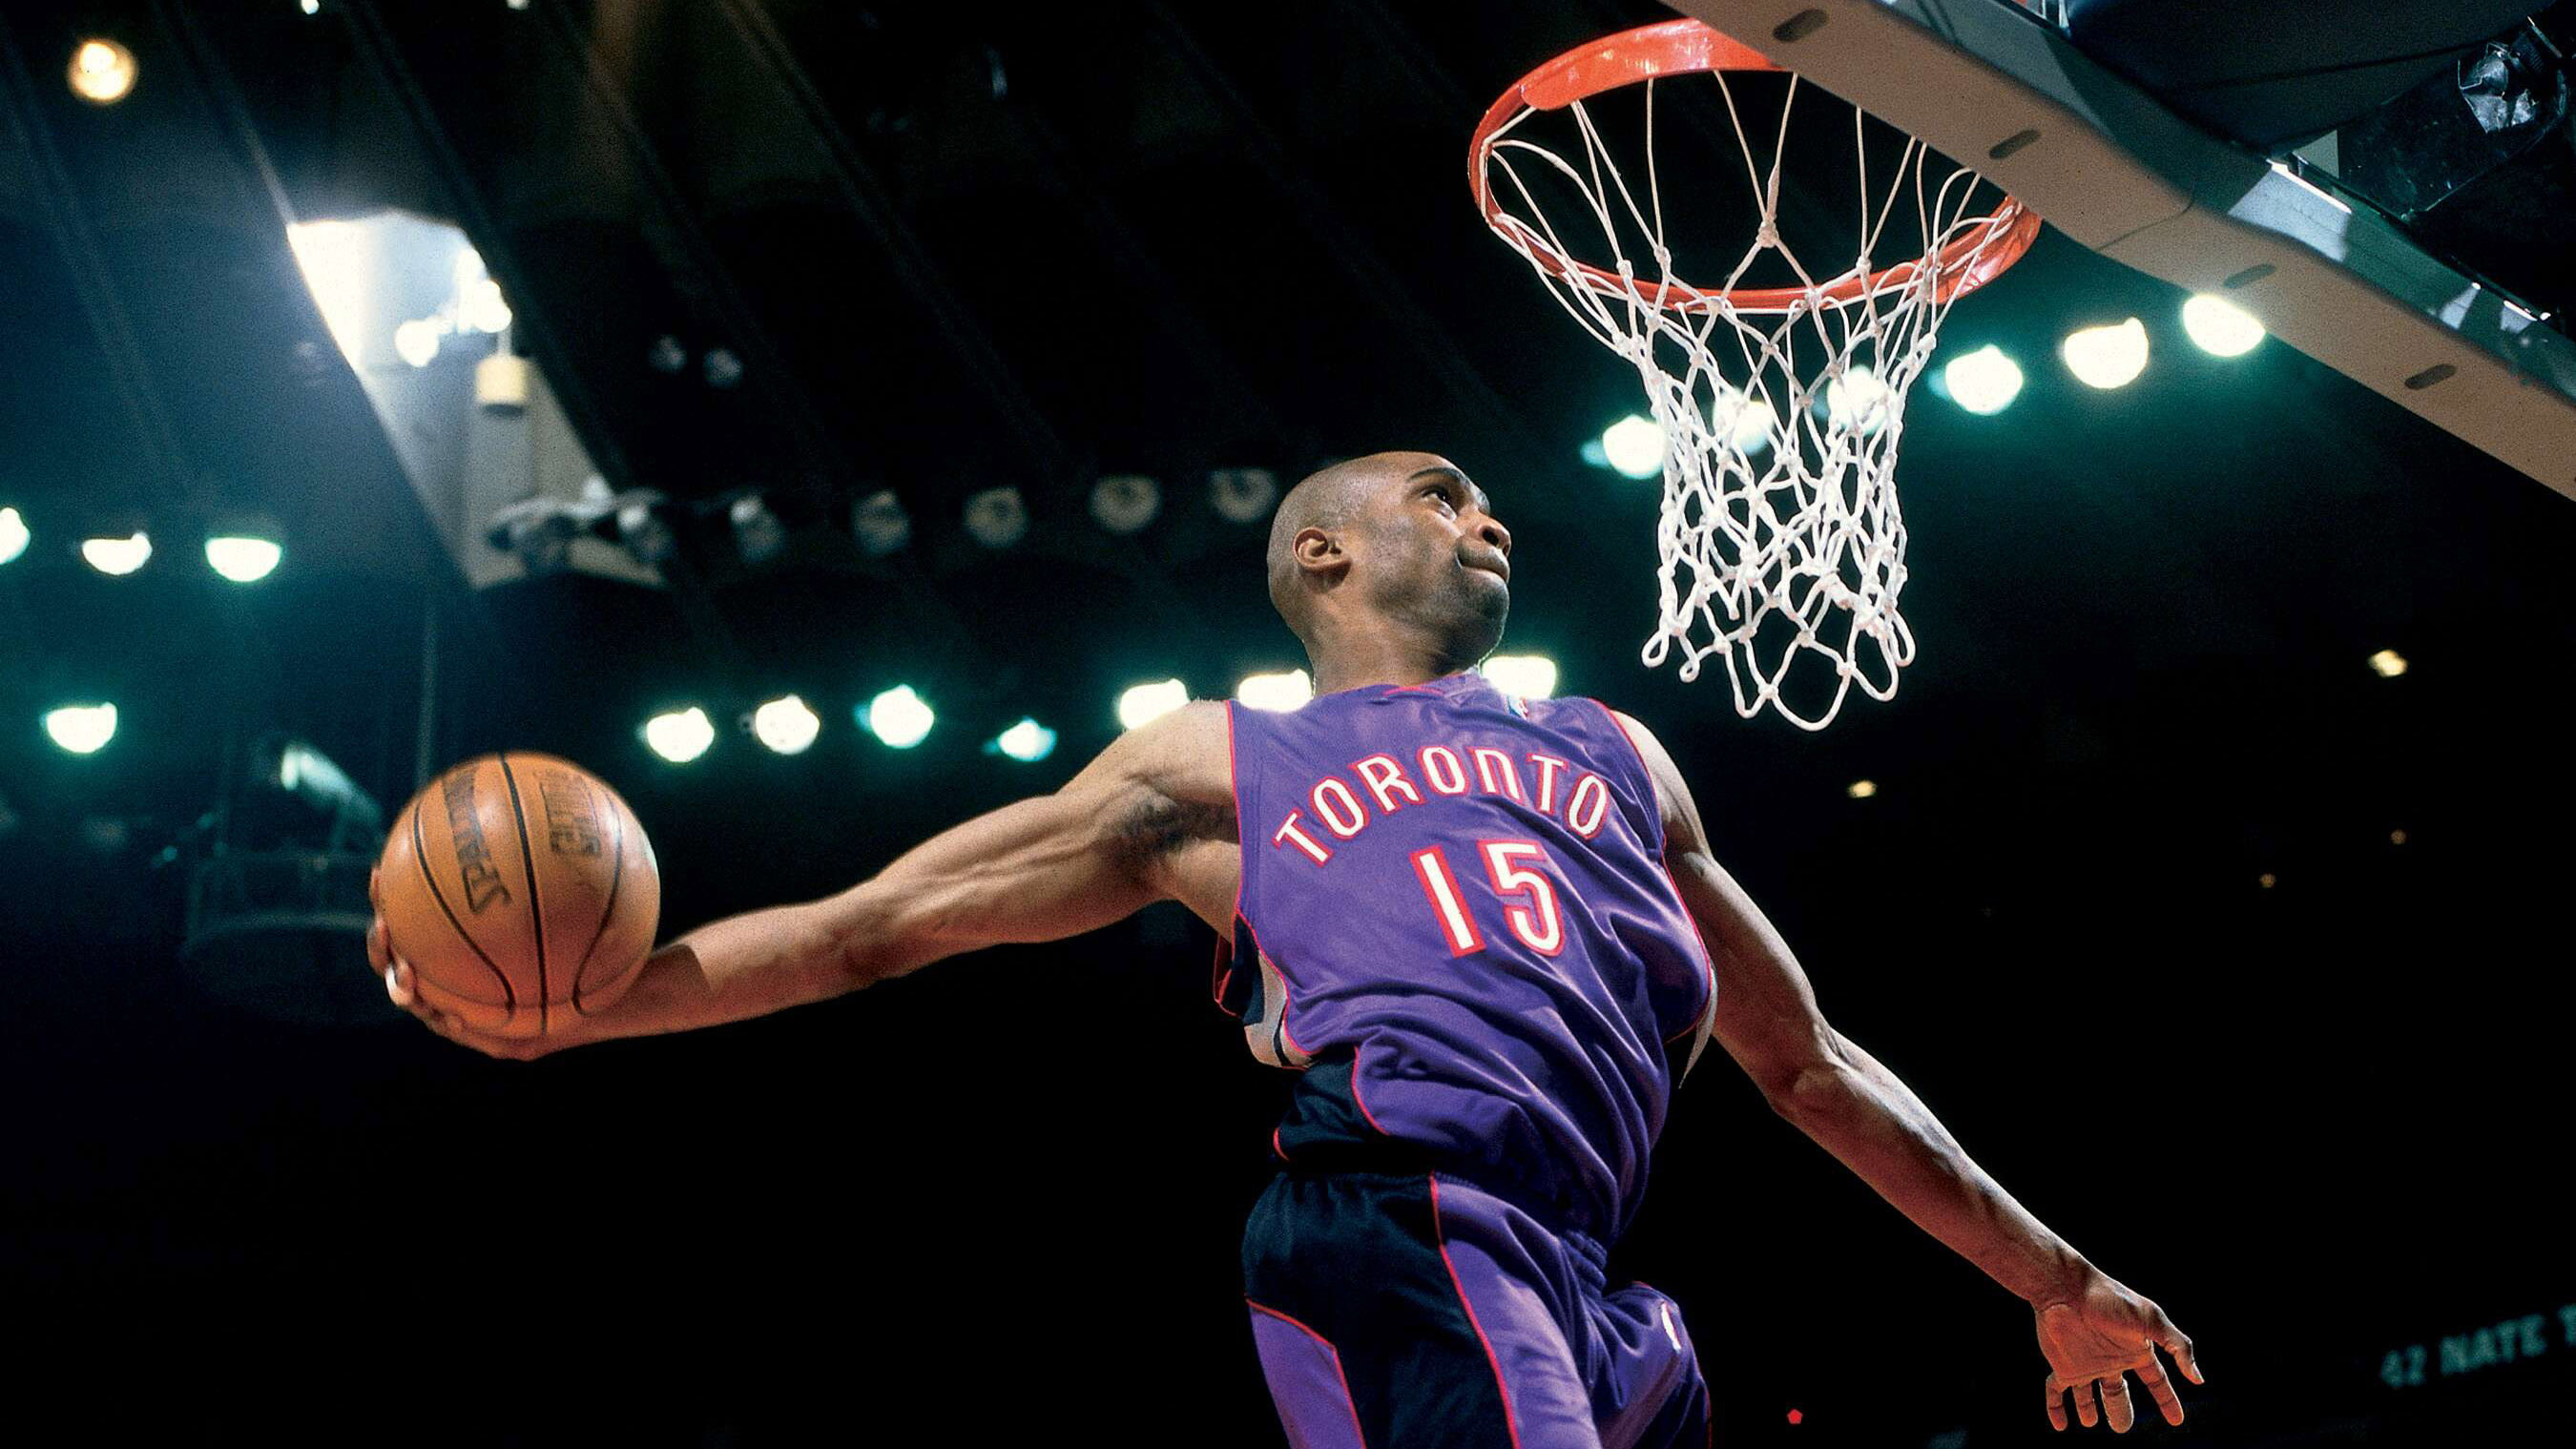 When the NBA Dunk Contest disappeared, Vince Carter brought it